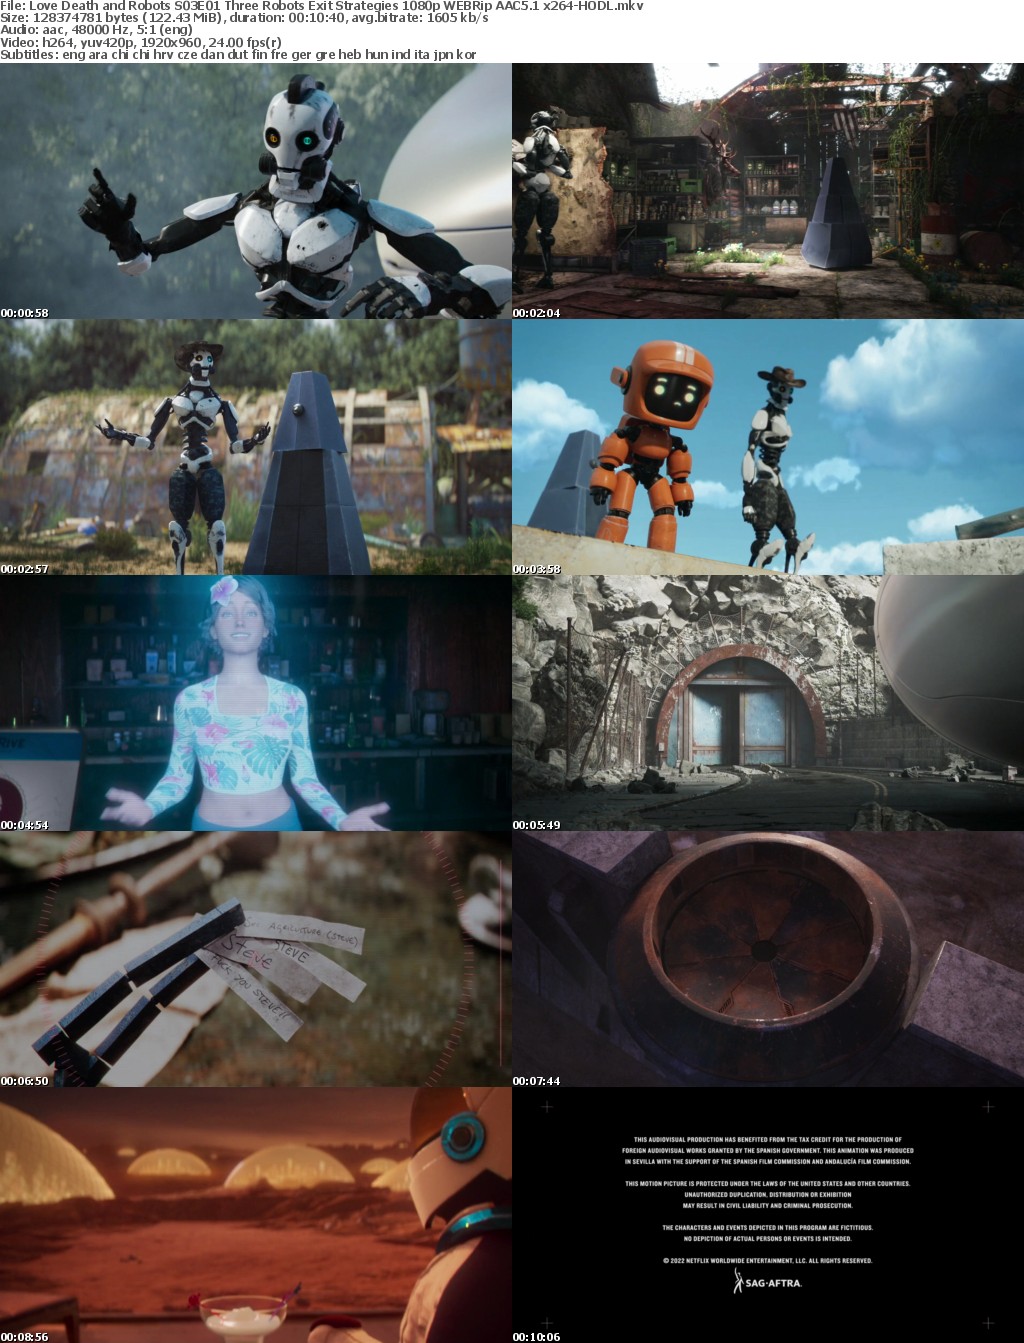 Love Death and Robots S03 Complete Season 3 1080p WEBRip AAC5 1 x264-HODL